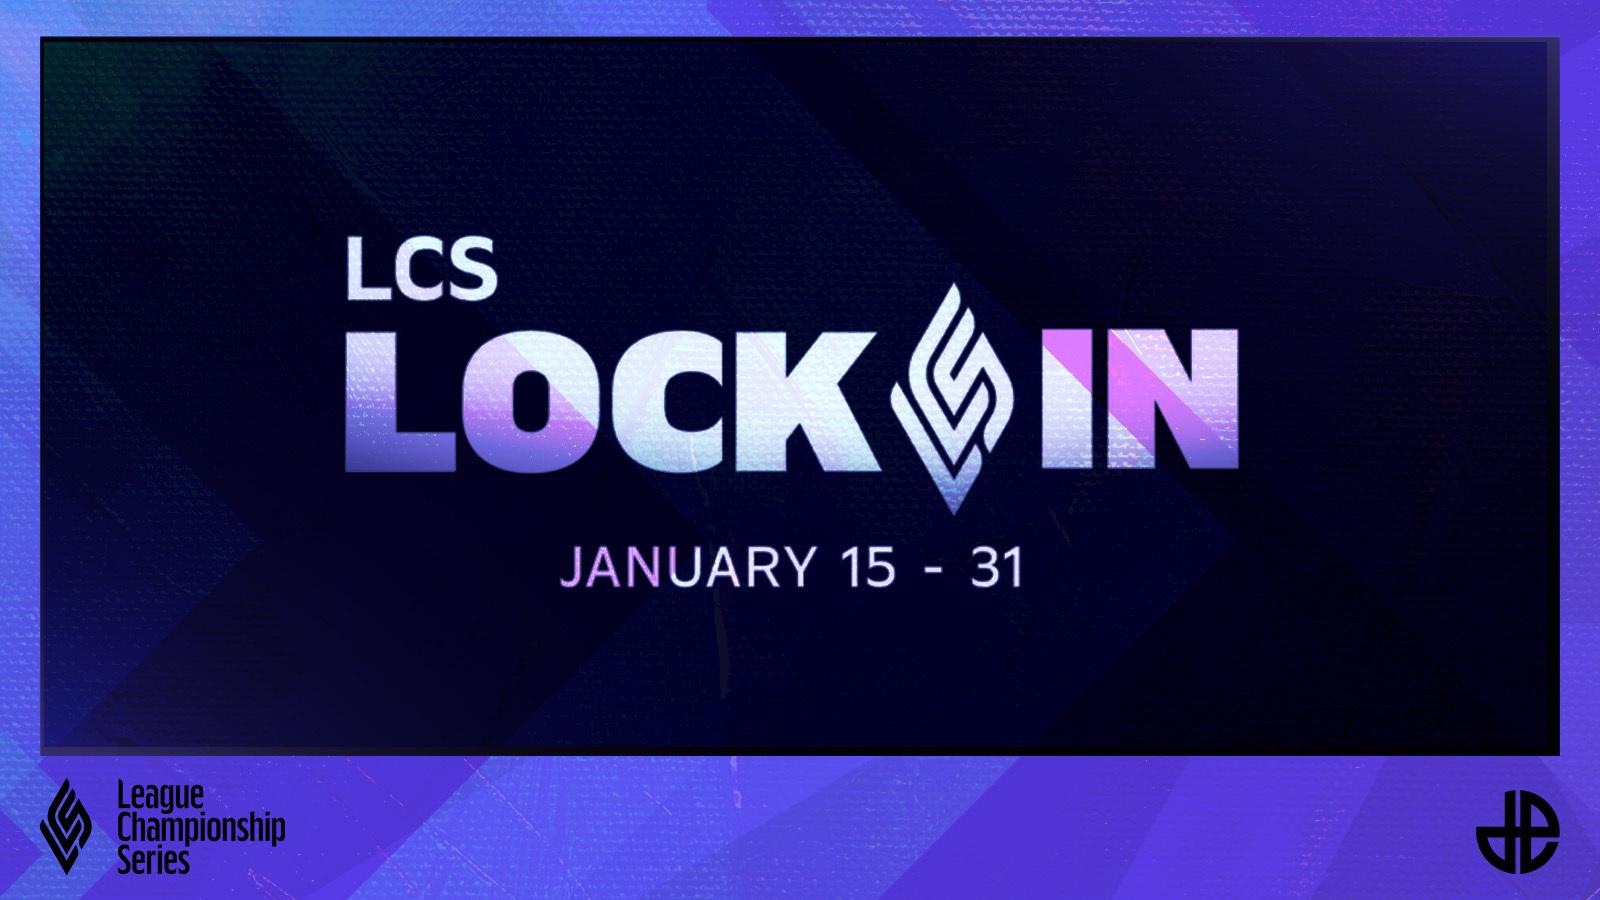 LCS Lock In 2021